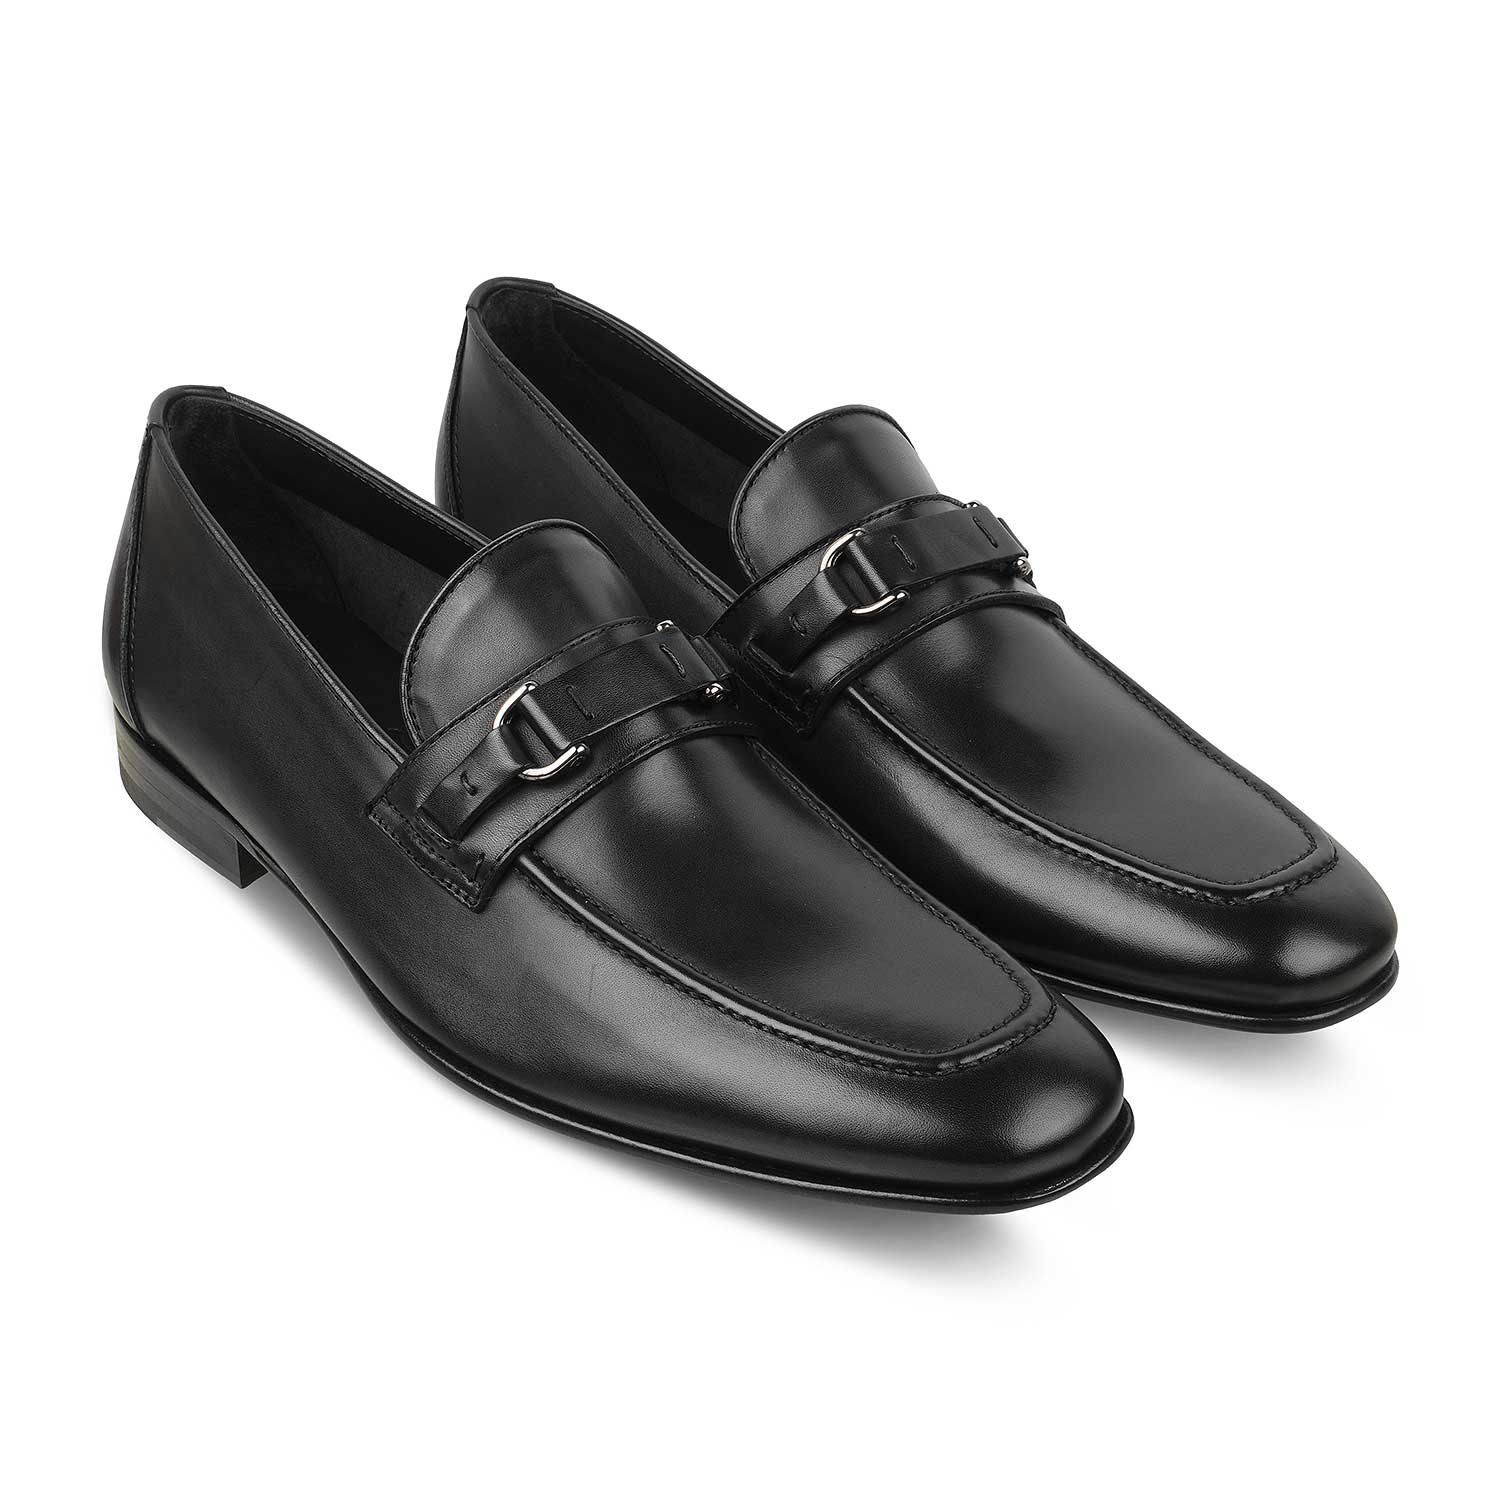 The Magno Black Men's Handcrafted Leather Loafers Tresmode